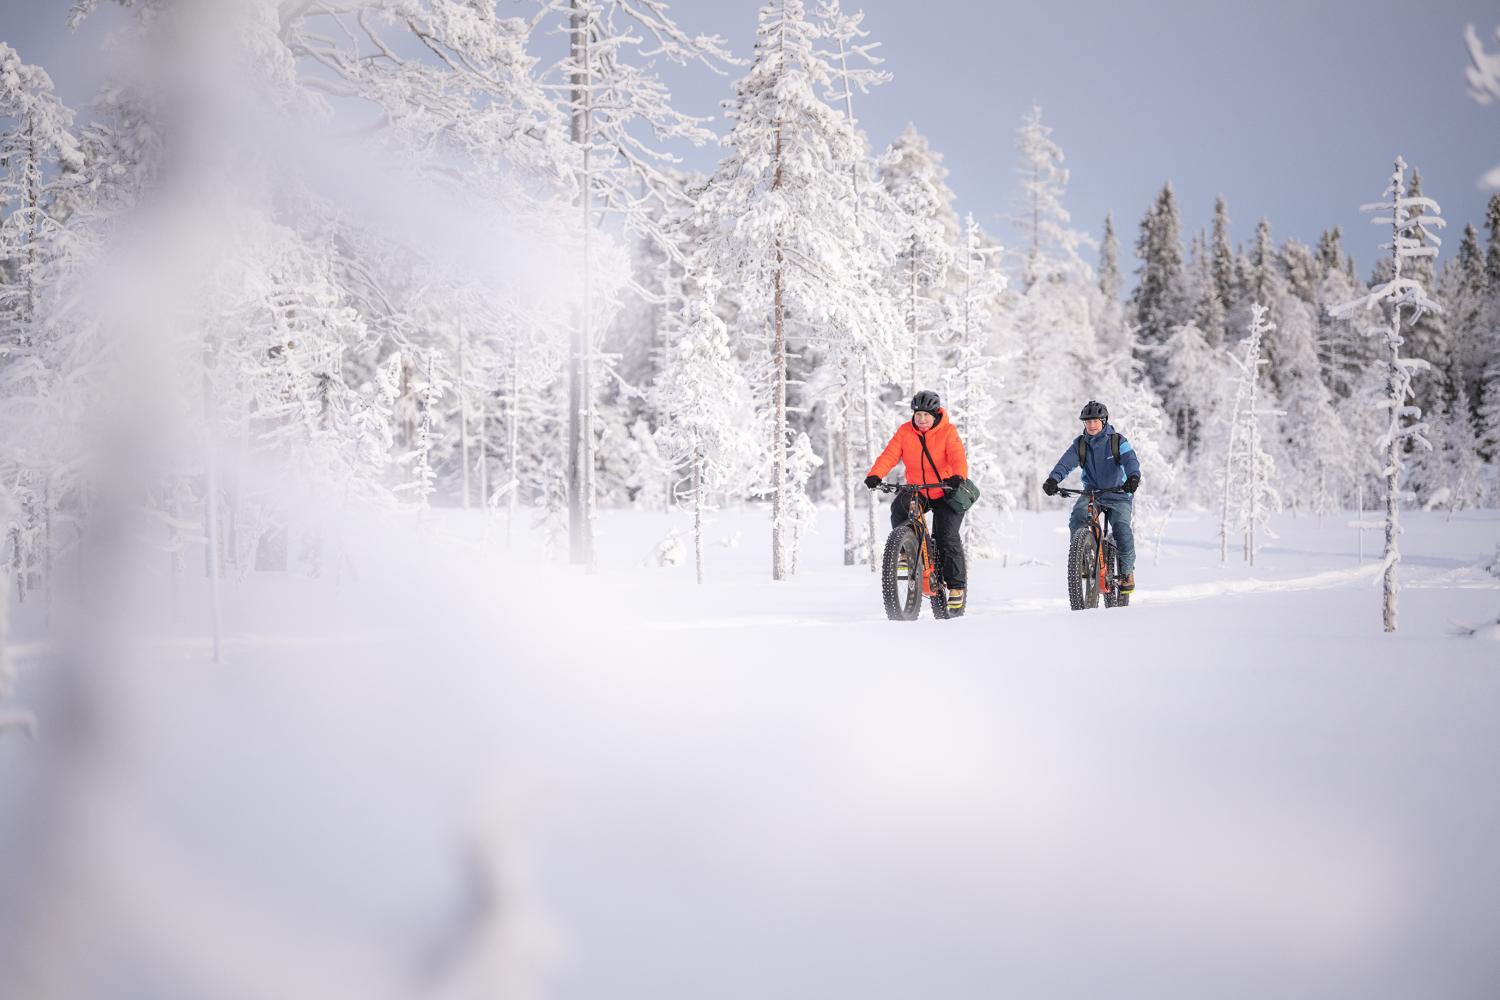 efatbike safari is a great way to enjoy the arctic nature